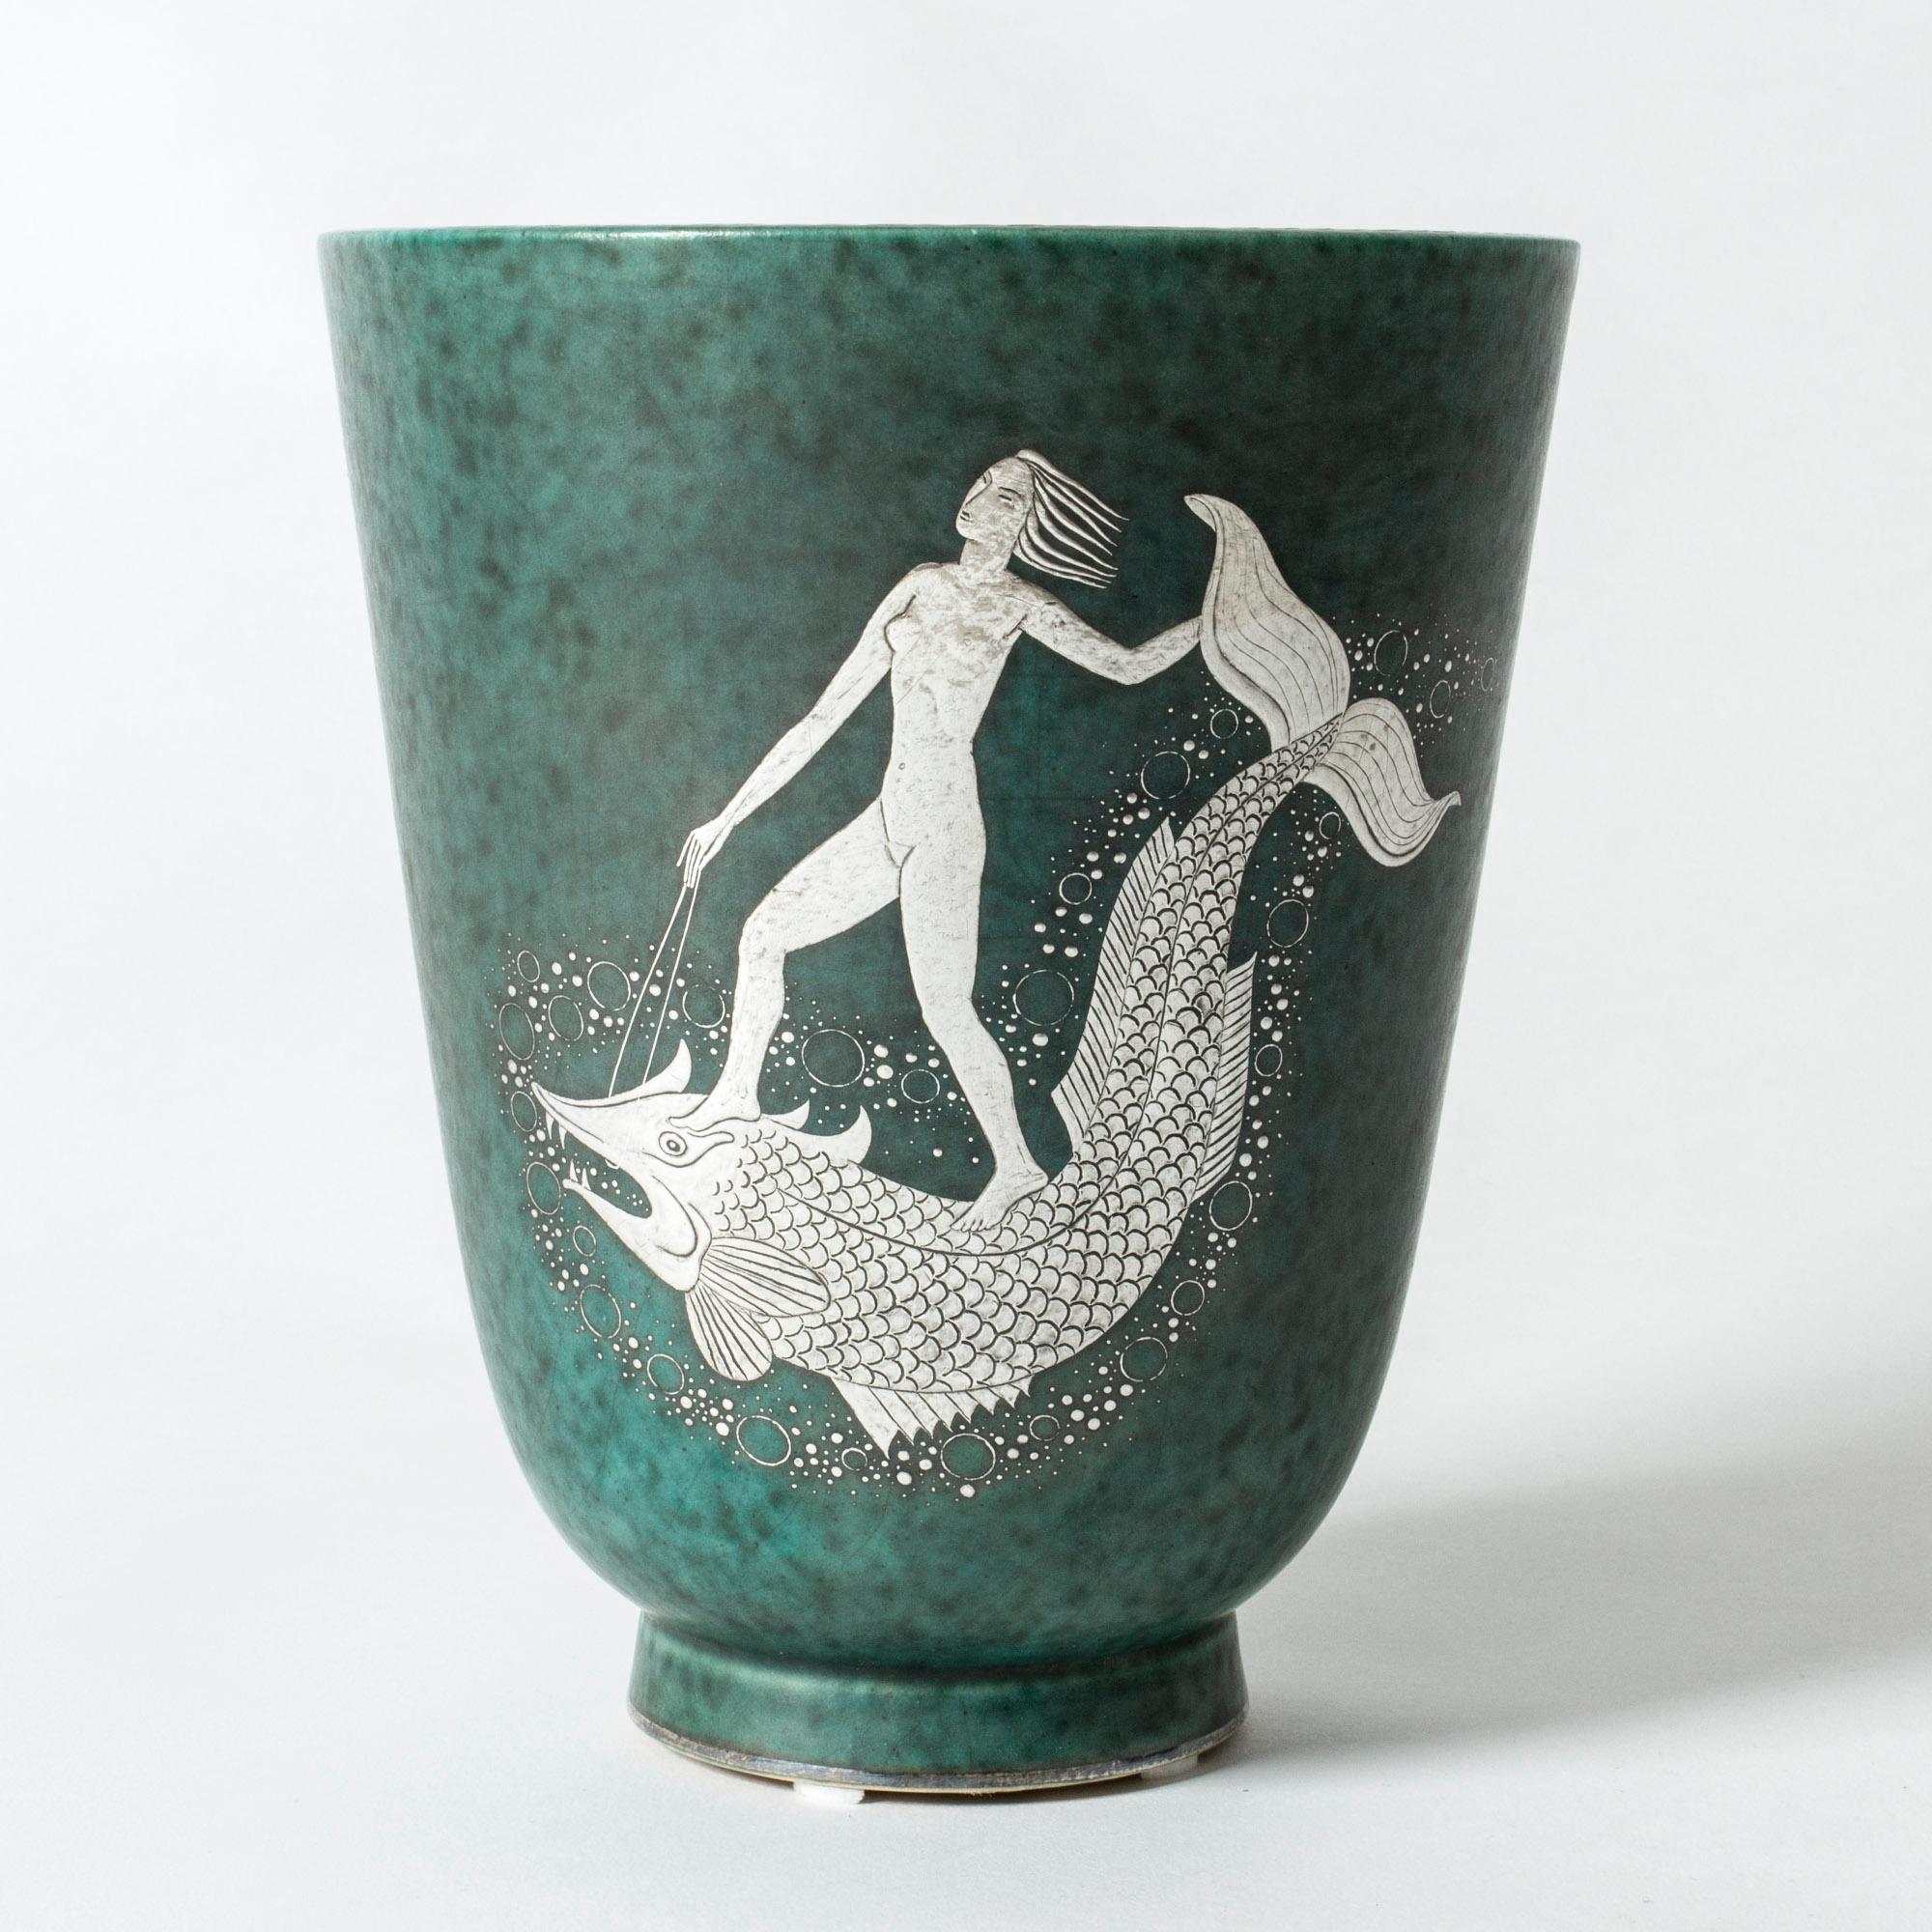 Stoneware “Argenta” vase by Wilhelm Kåge with an amazing silver decor of a woman riding on a fish. Lovely attention to every detail.

“Argenta” was introduced at the Stockholm exhibition in 1930 and became Wilhelm Kåge’s most widely appreciated